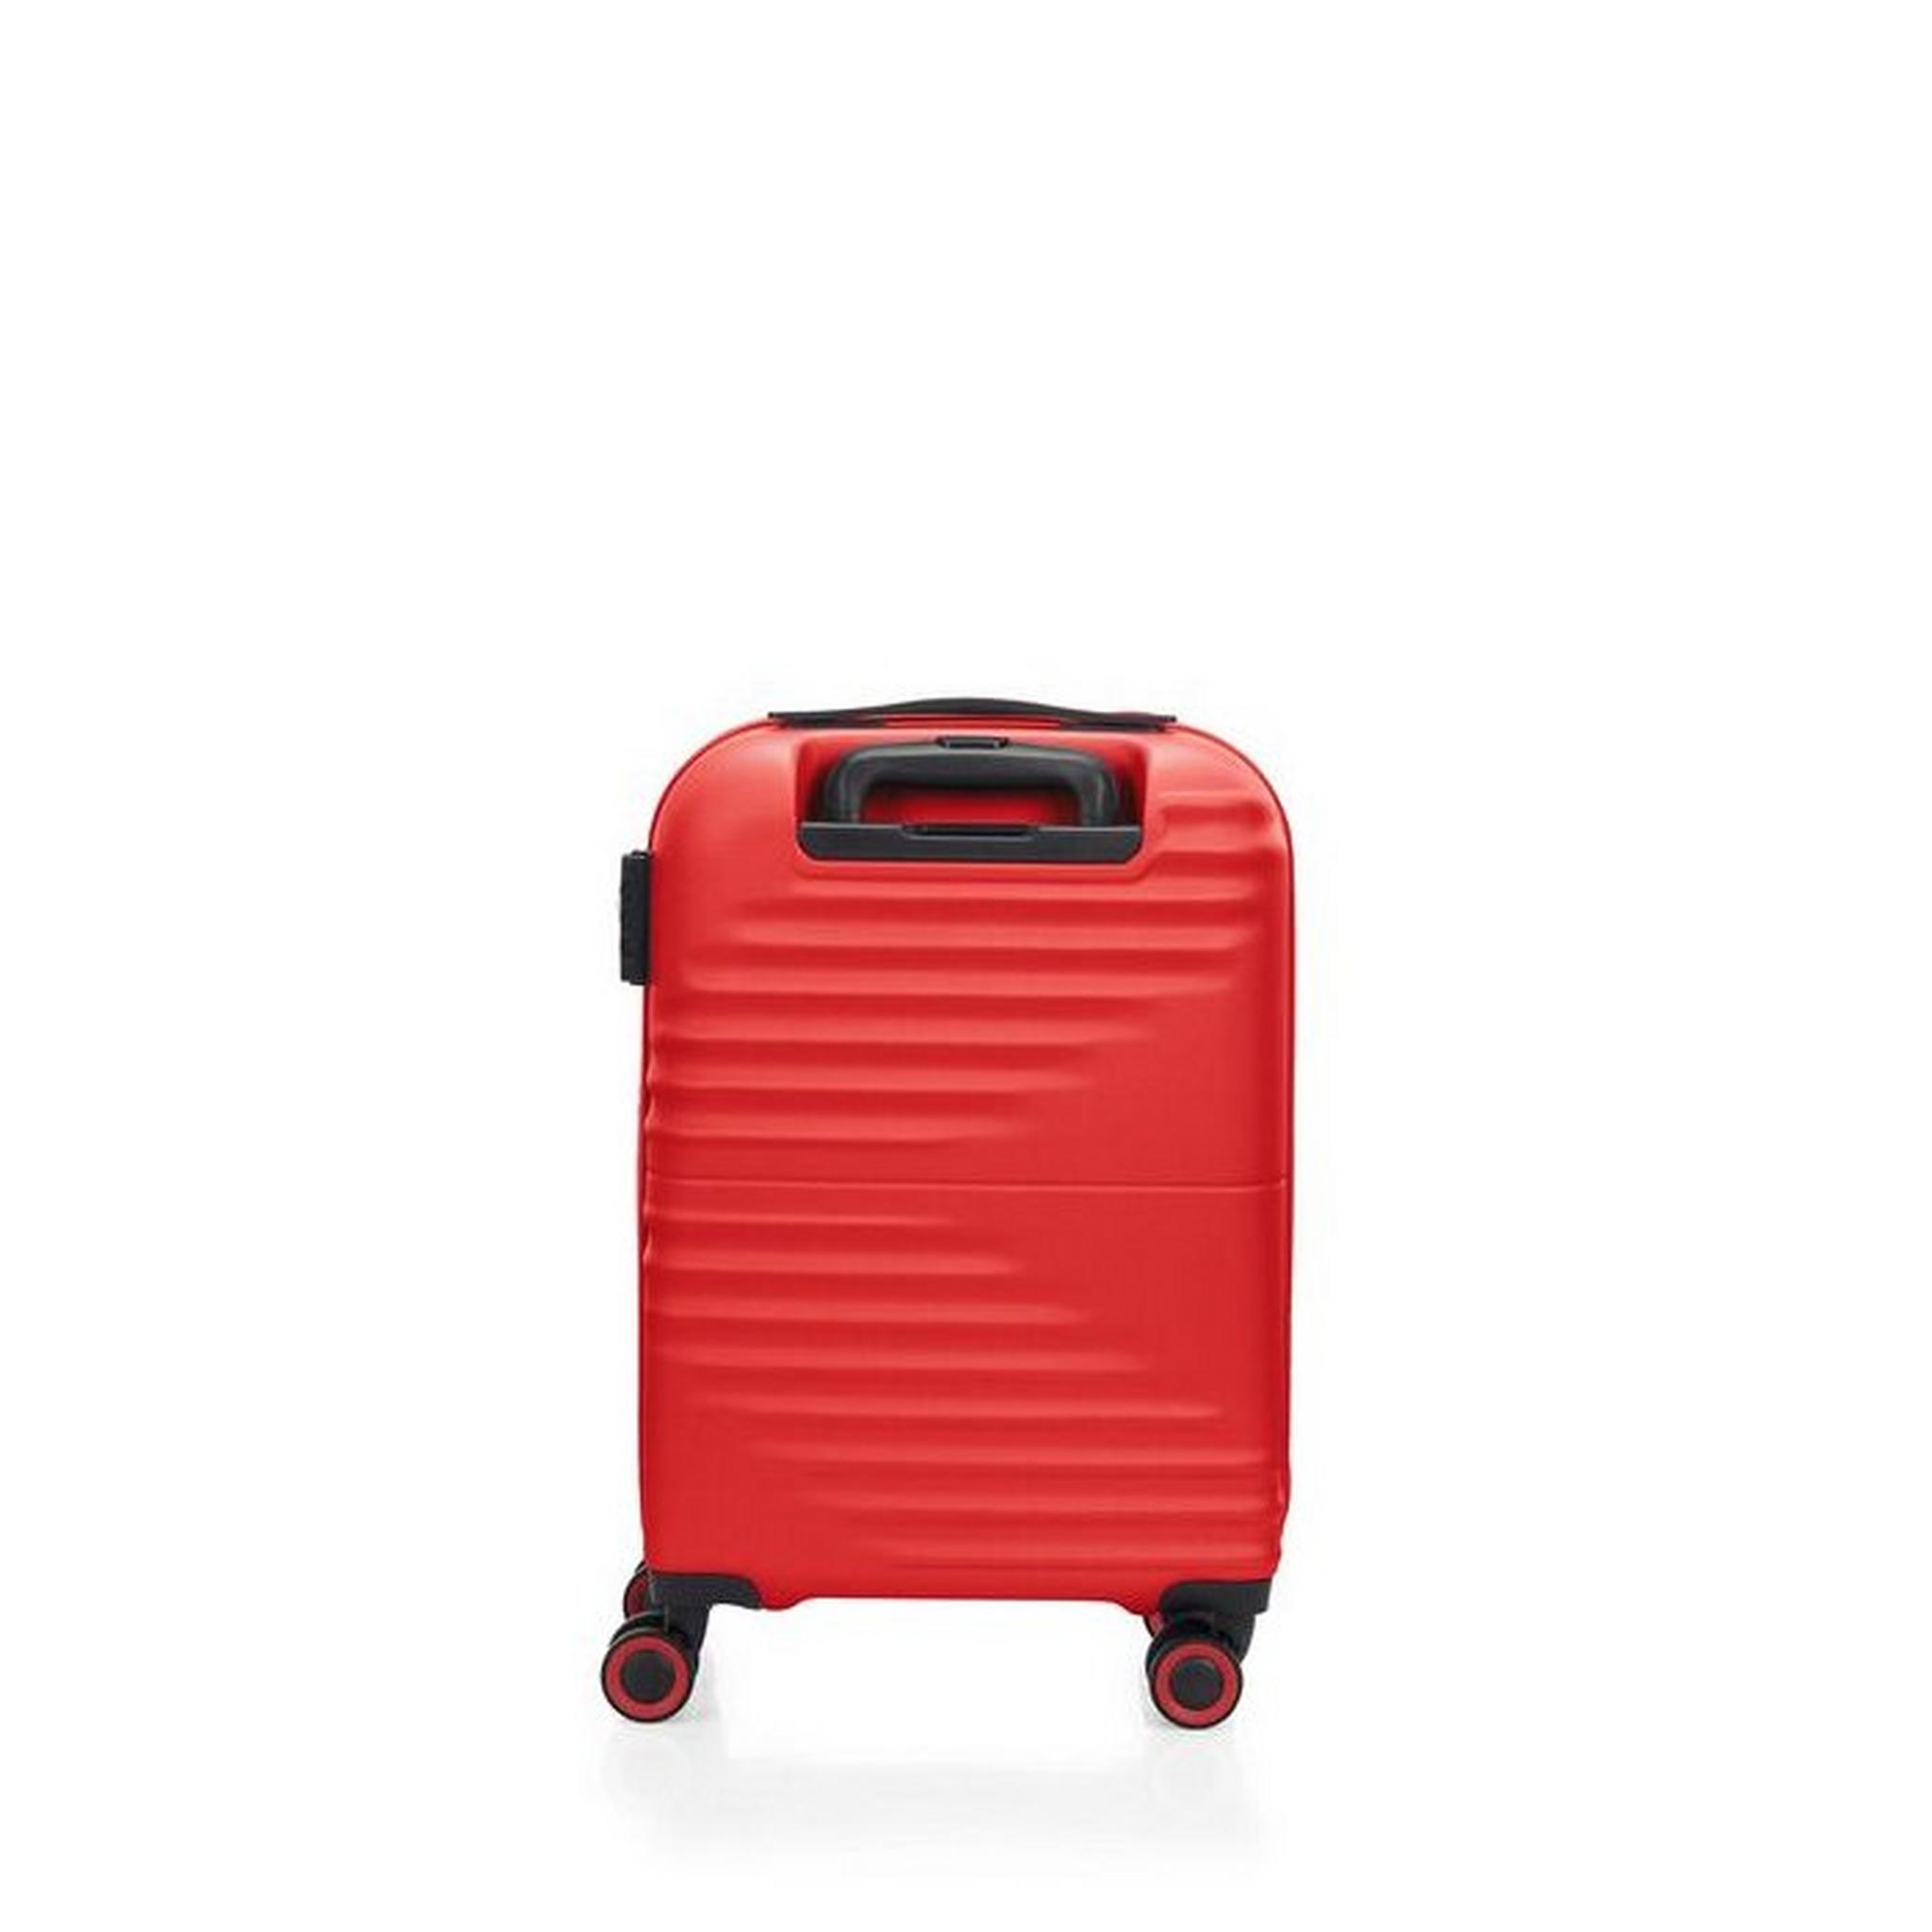 American Tourister Twist Wave Spinner 88CM Hard Luggage, QC6X00009 - Vivid Red